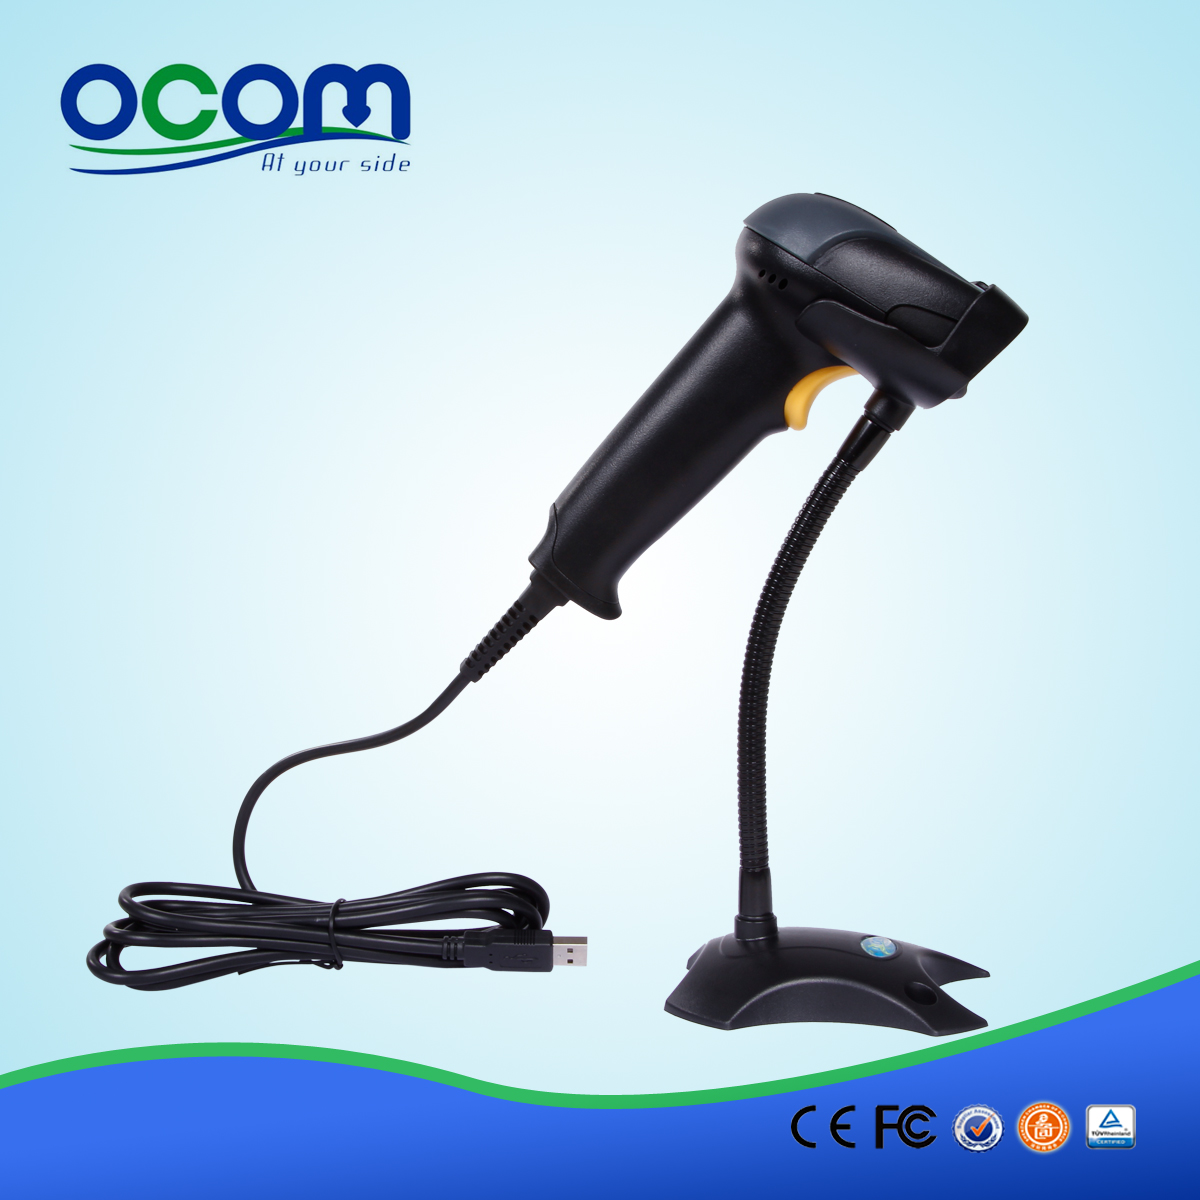 OCBS-LA09 High Scan Rate and Long Reading Distance Pro 1D Barcode Scanner